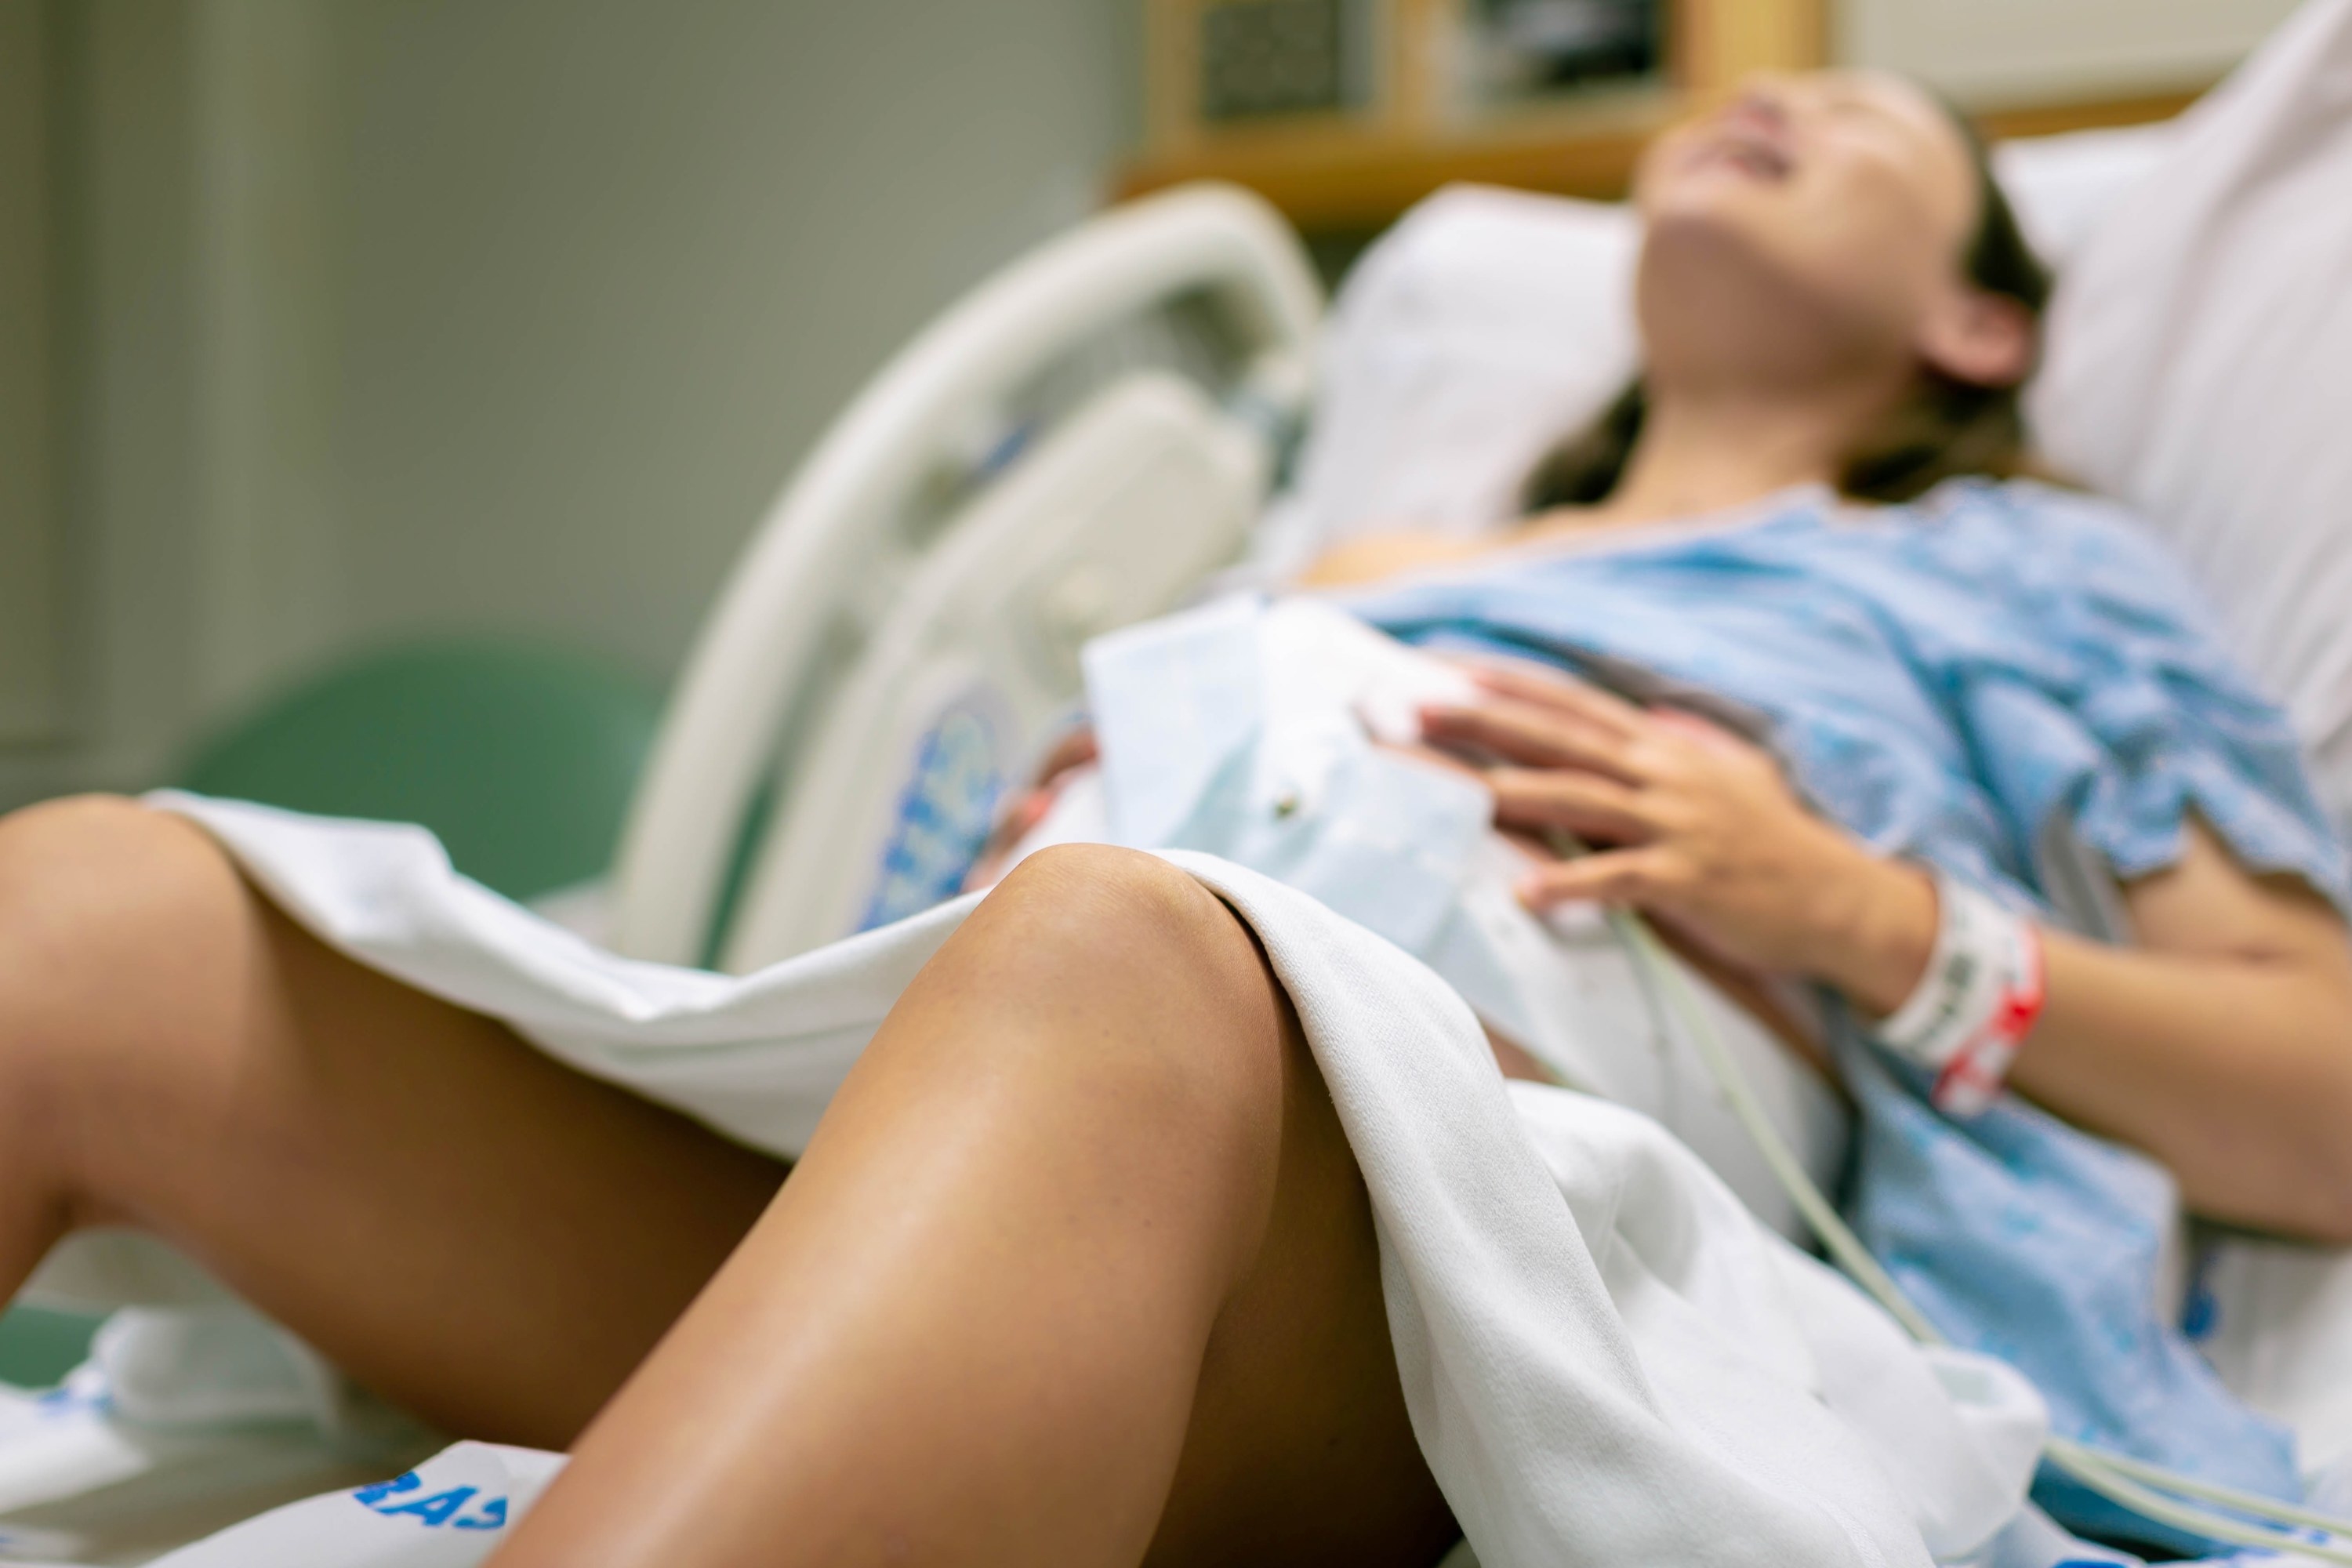 A woman screaming in pain from strong contractions during childbirth